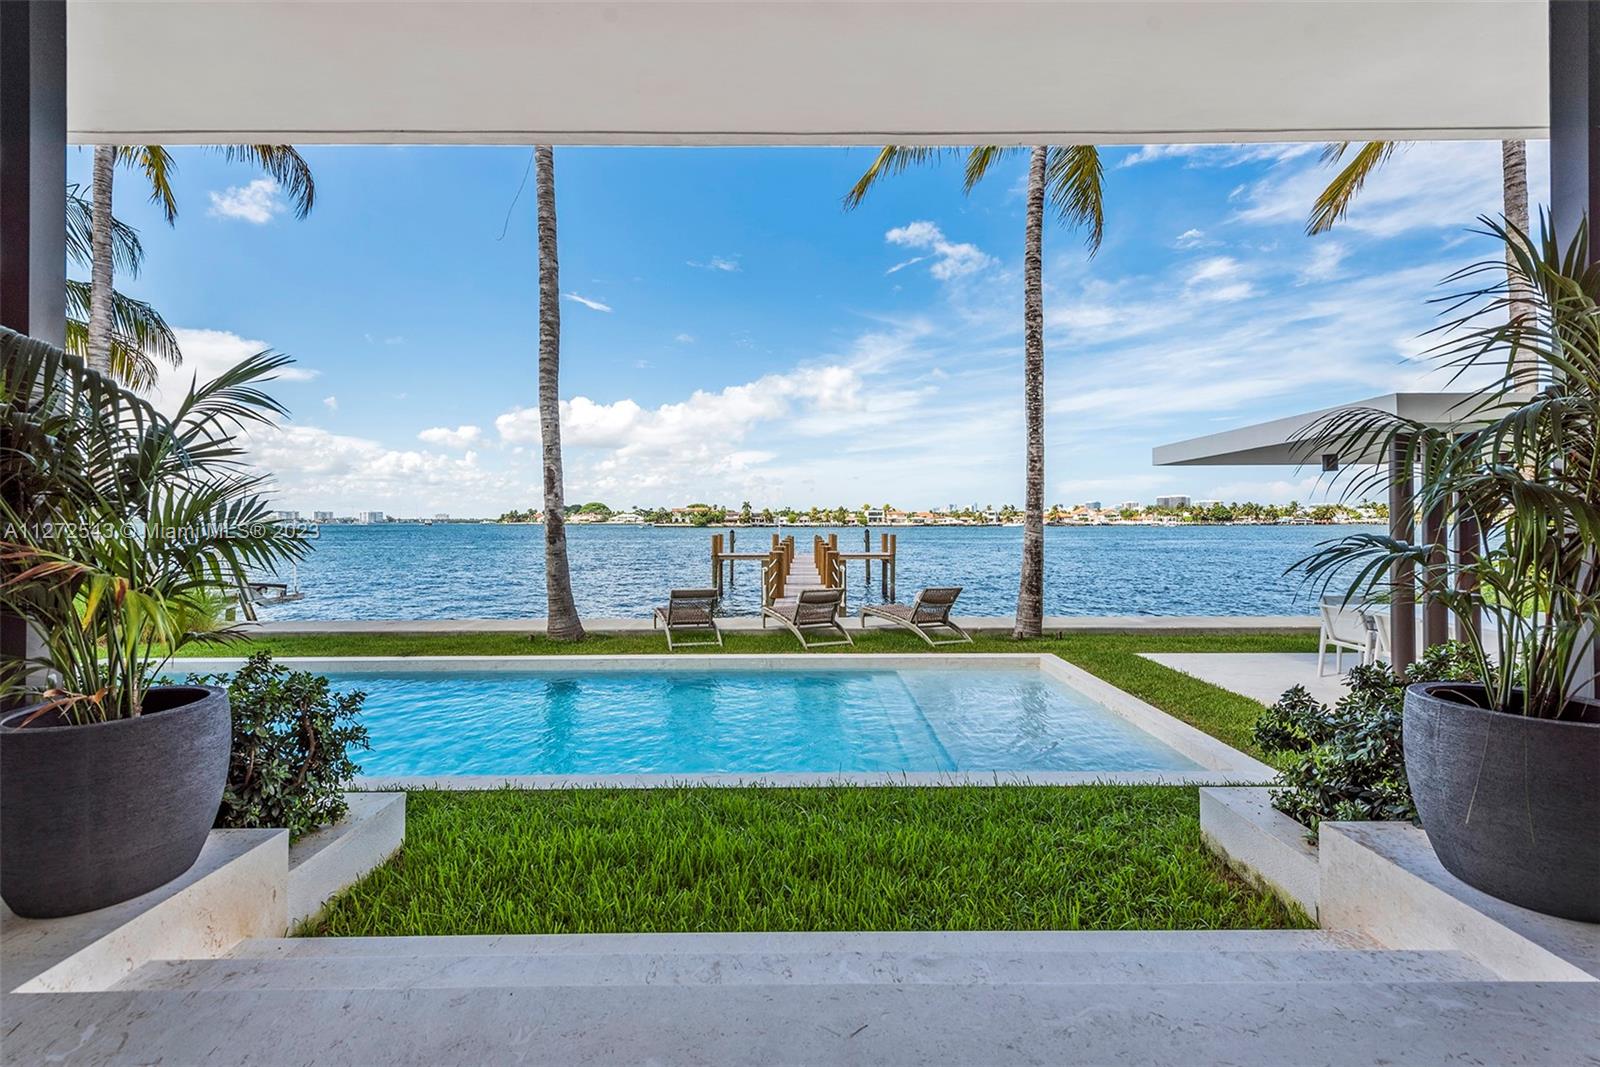 Overlooking Biscayne Bay and the billionaires of Indian Creek Island, this brand new, never lived in mansion, features 6 bedrooms and 7.5 baths over 5625 sqft under air with 75ft on the water and 2 car garage. With its Mid-Century Modern flair and an attention to details rarely seen, this home will leave you speechless. Gated community and walking distance to the beach. Built by Luxury Builder Puren Homes.